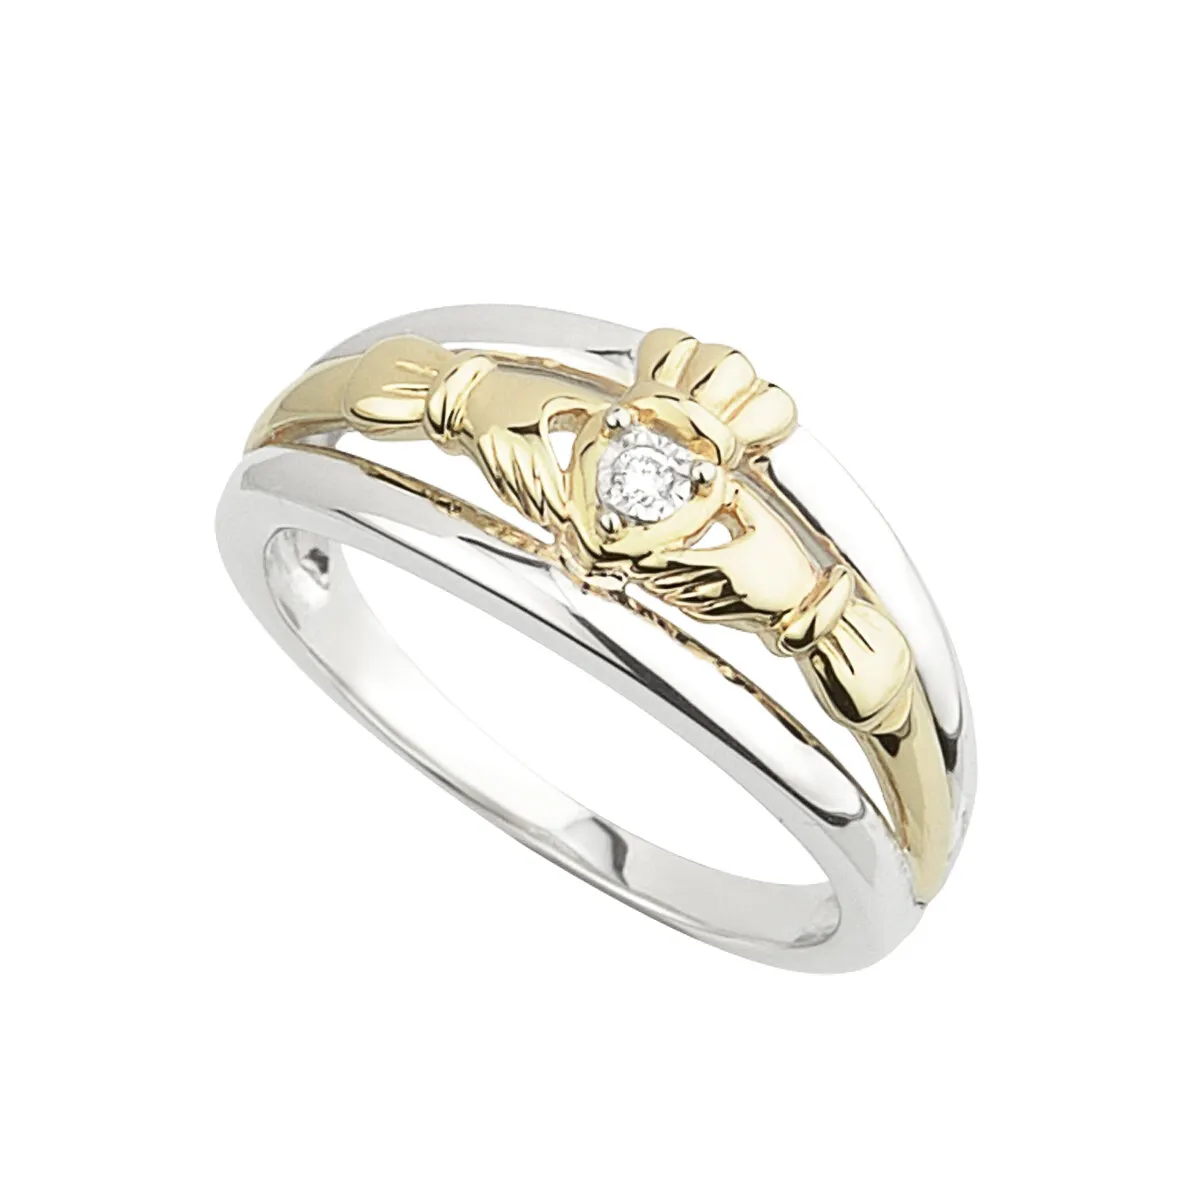 Gold And Silver Diamond Claddagh Rings...